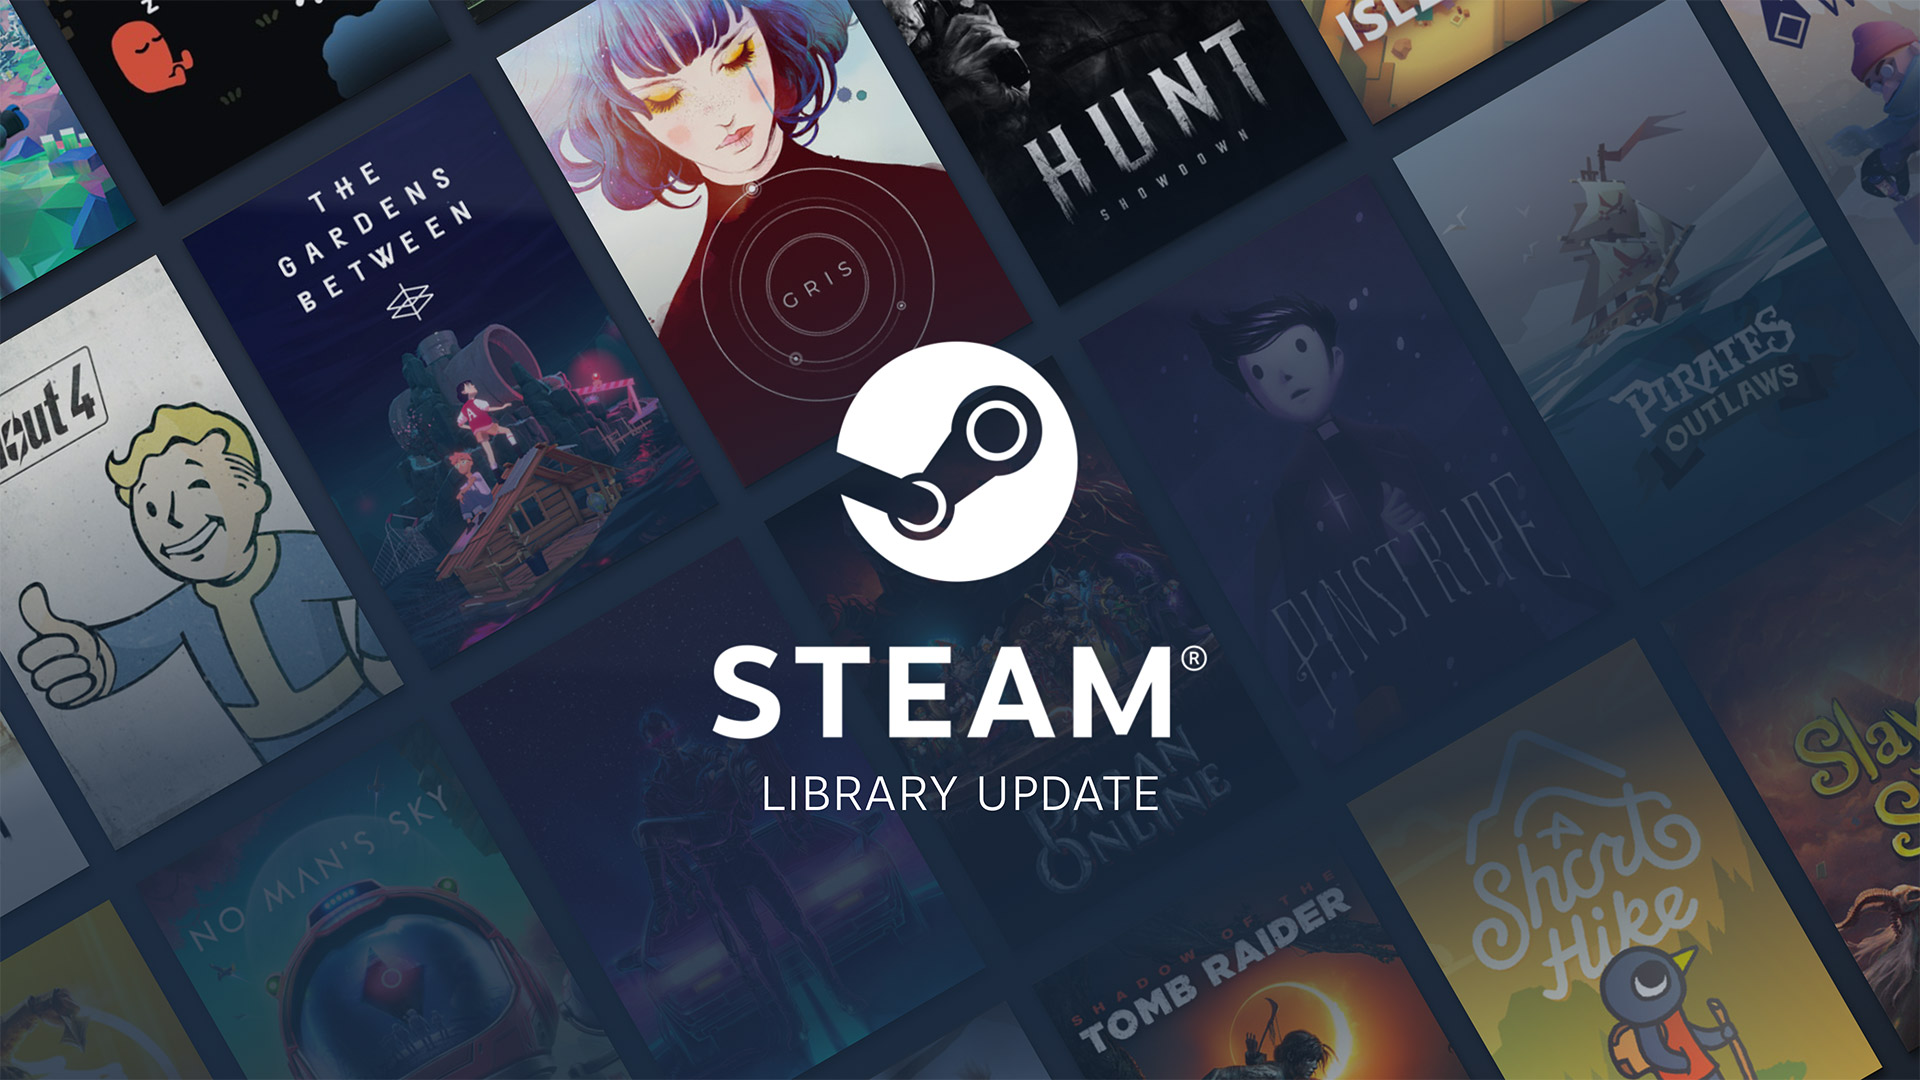 The New Steam Library